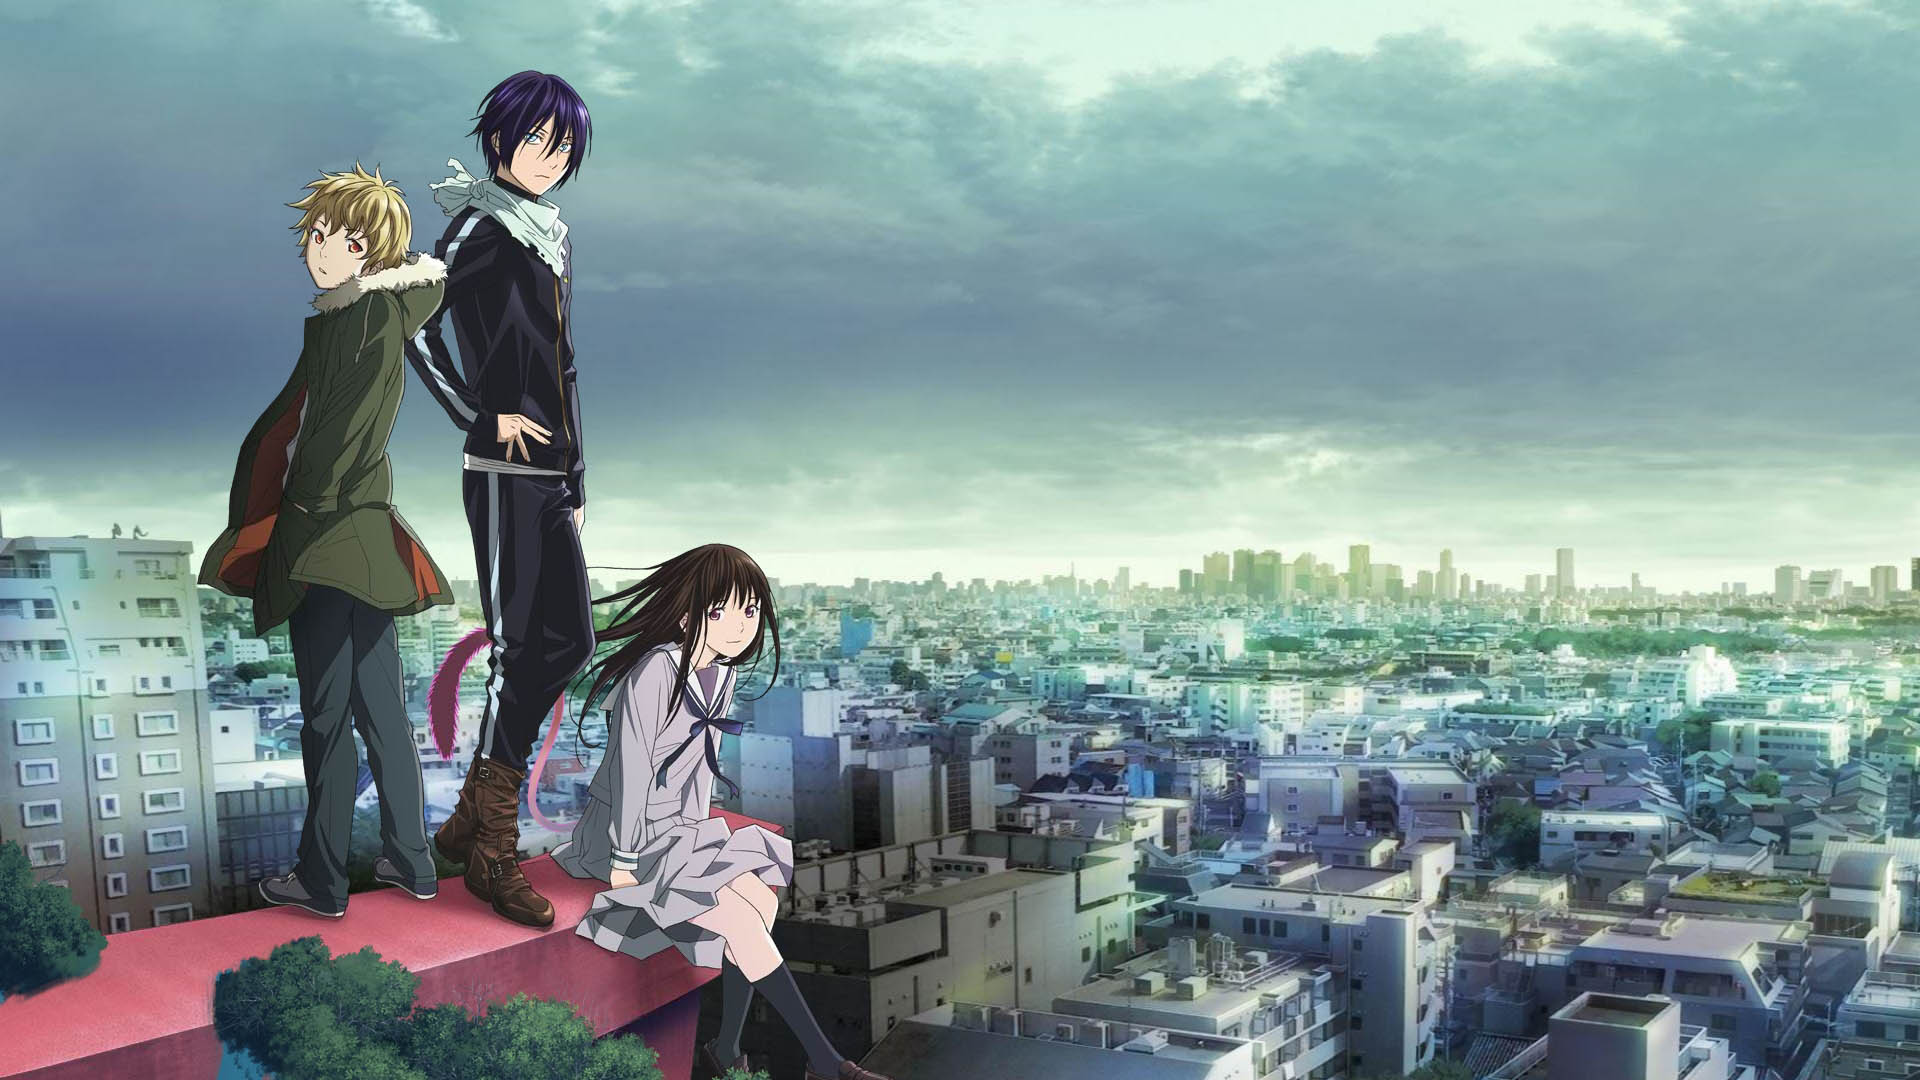 1920x1080 > Noragami Wallpapers